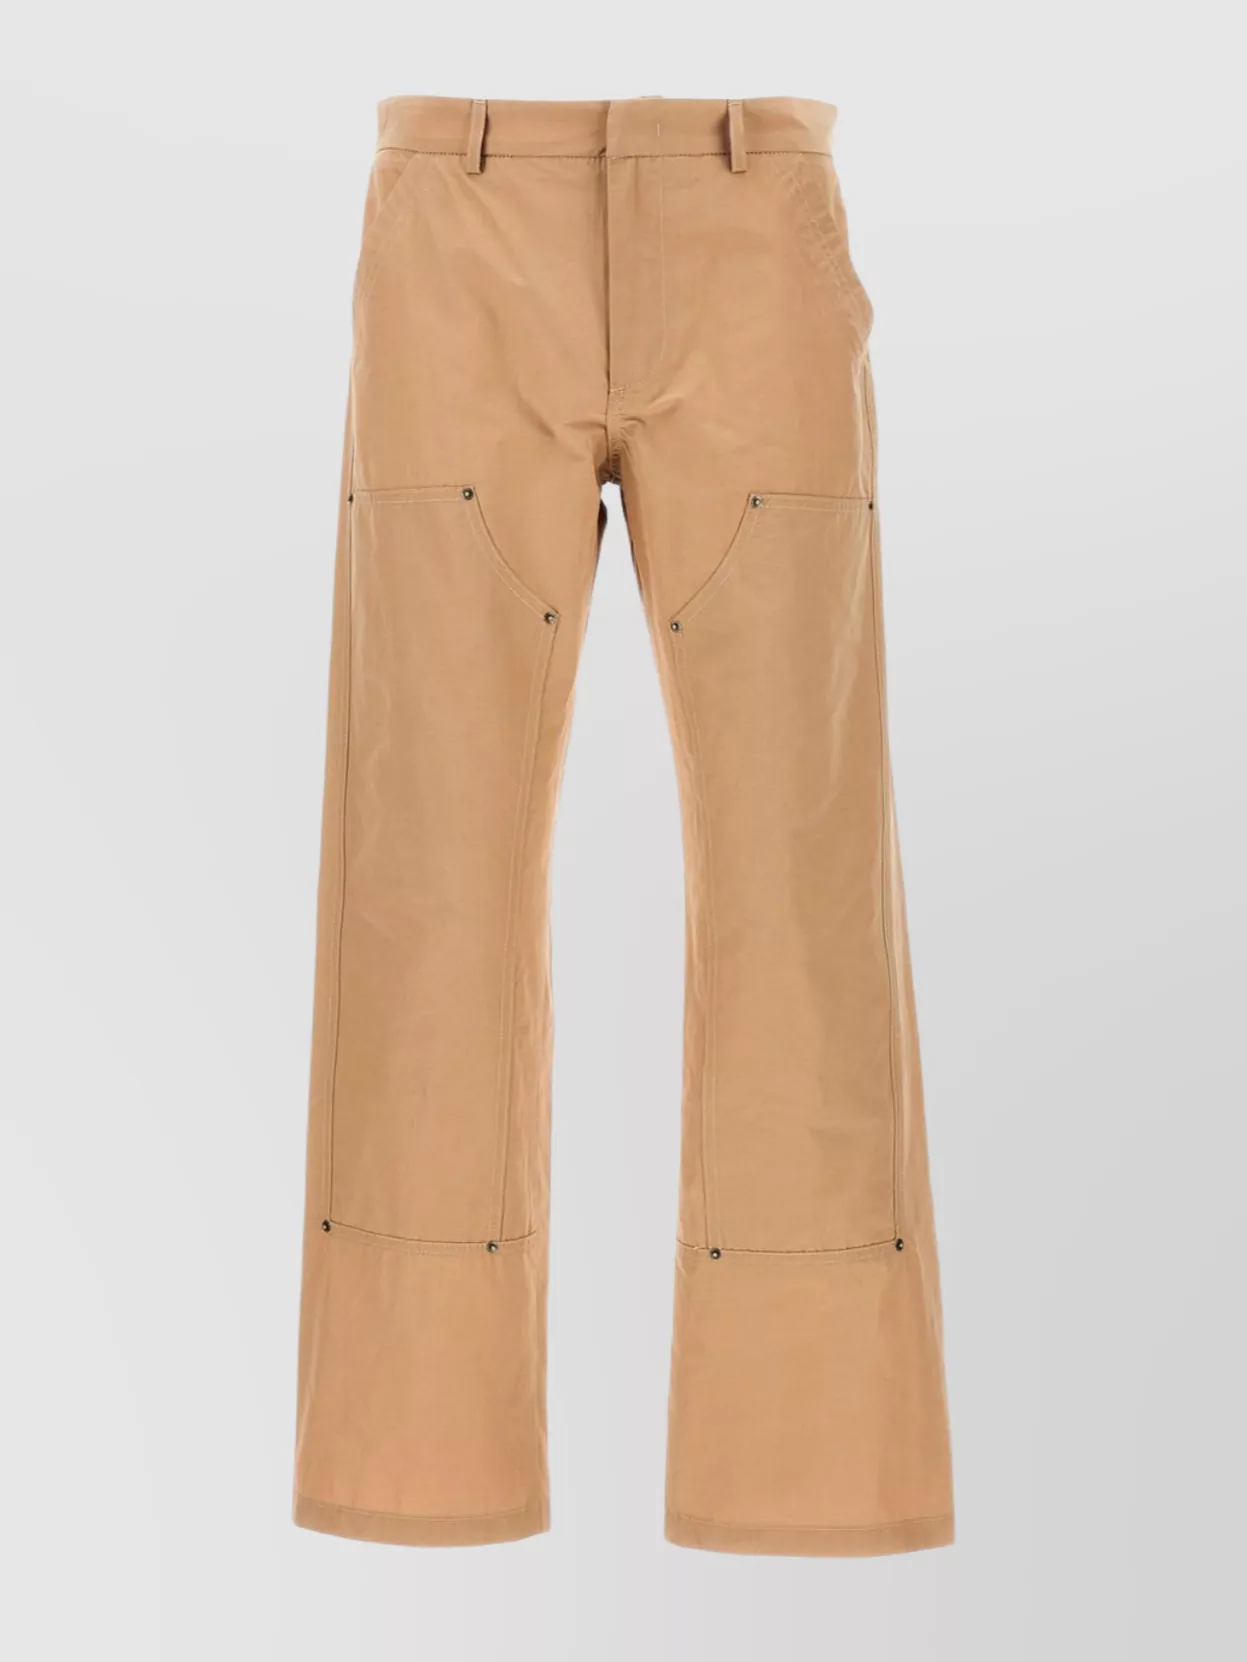 424 Stitched Straight Leg Pants With Front And Back Pockets In Brown